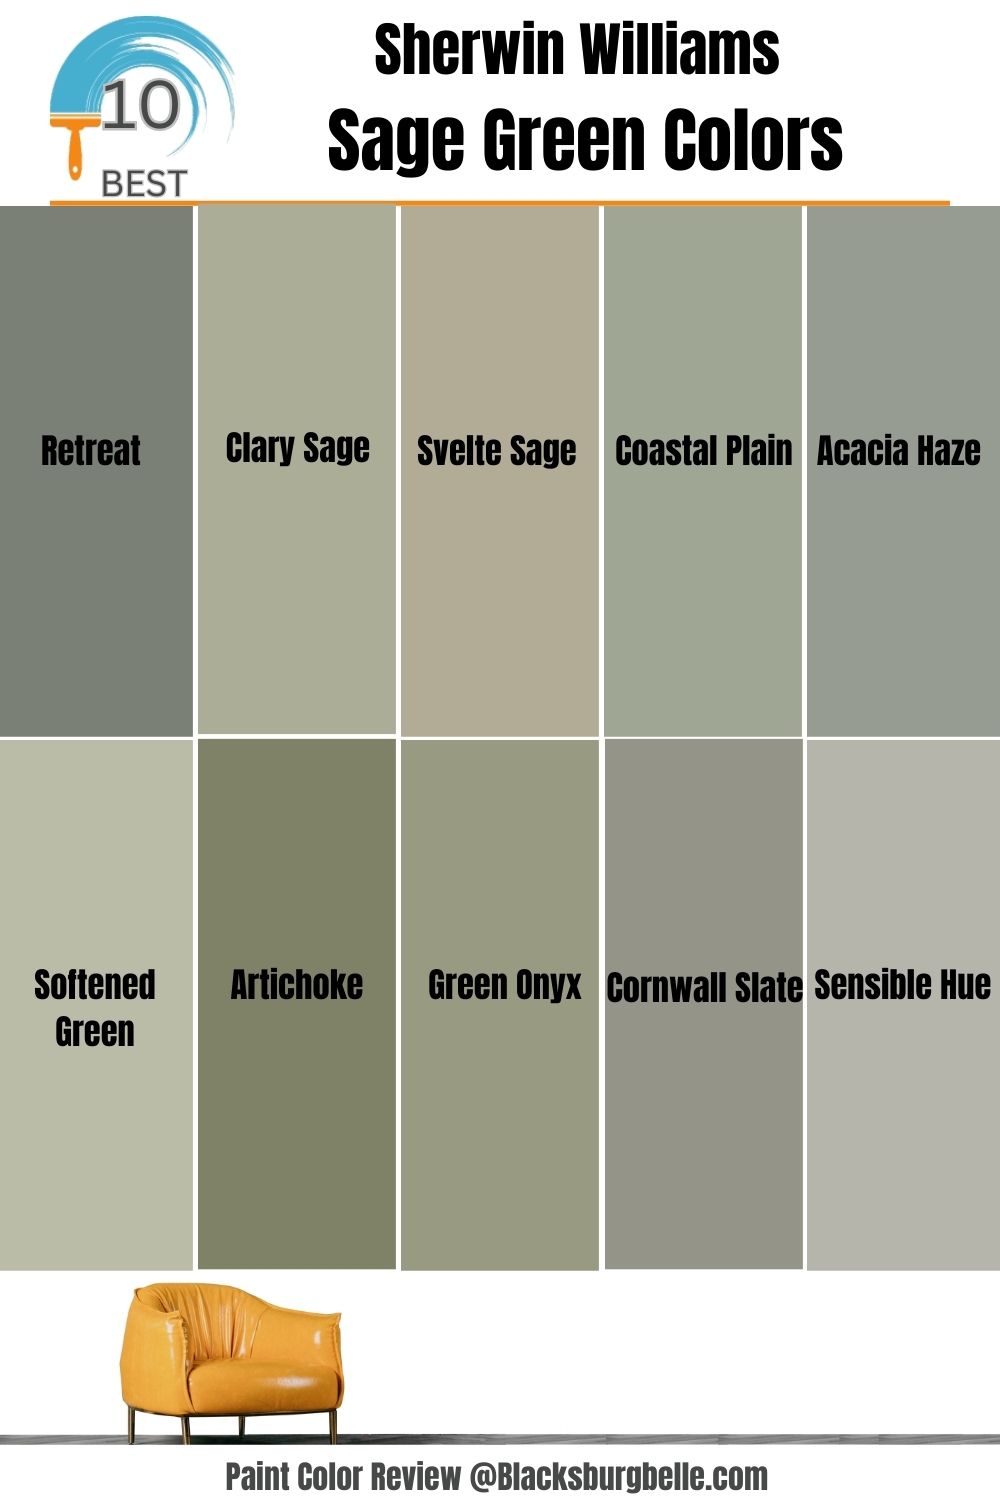 10 Best Sherwin Williams Sage Green Colors